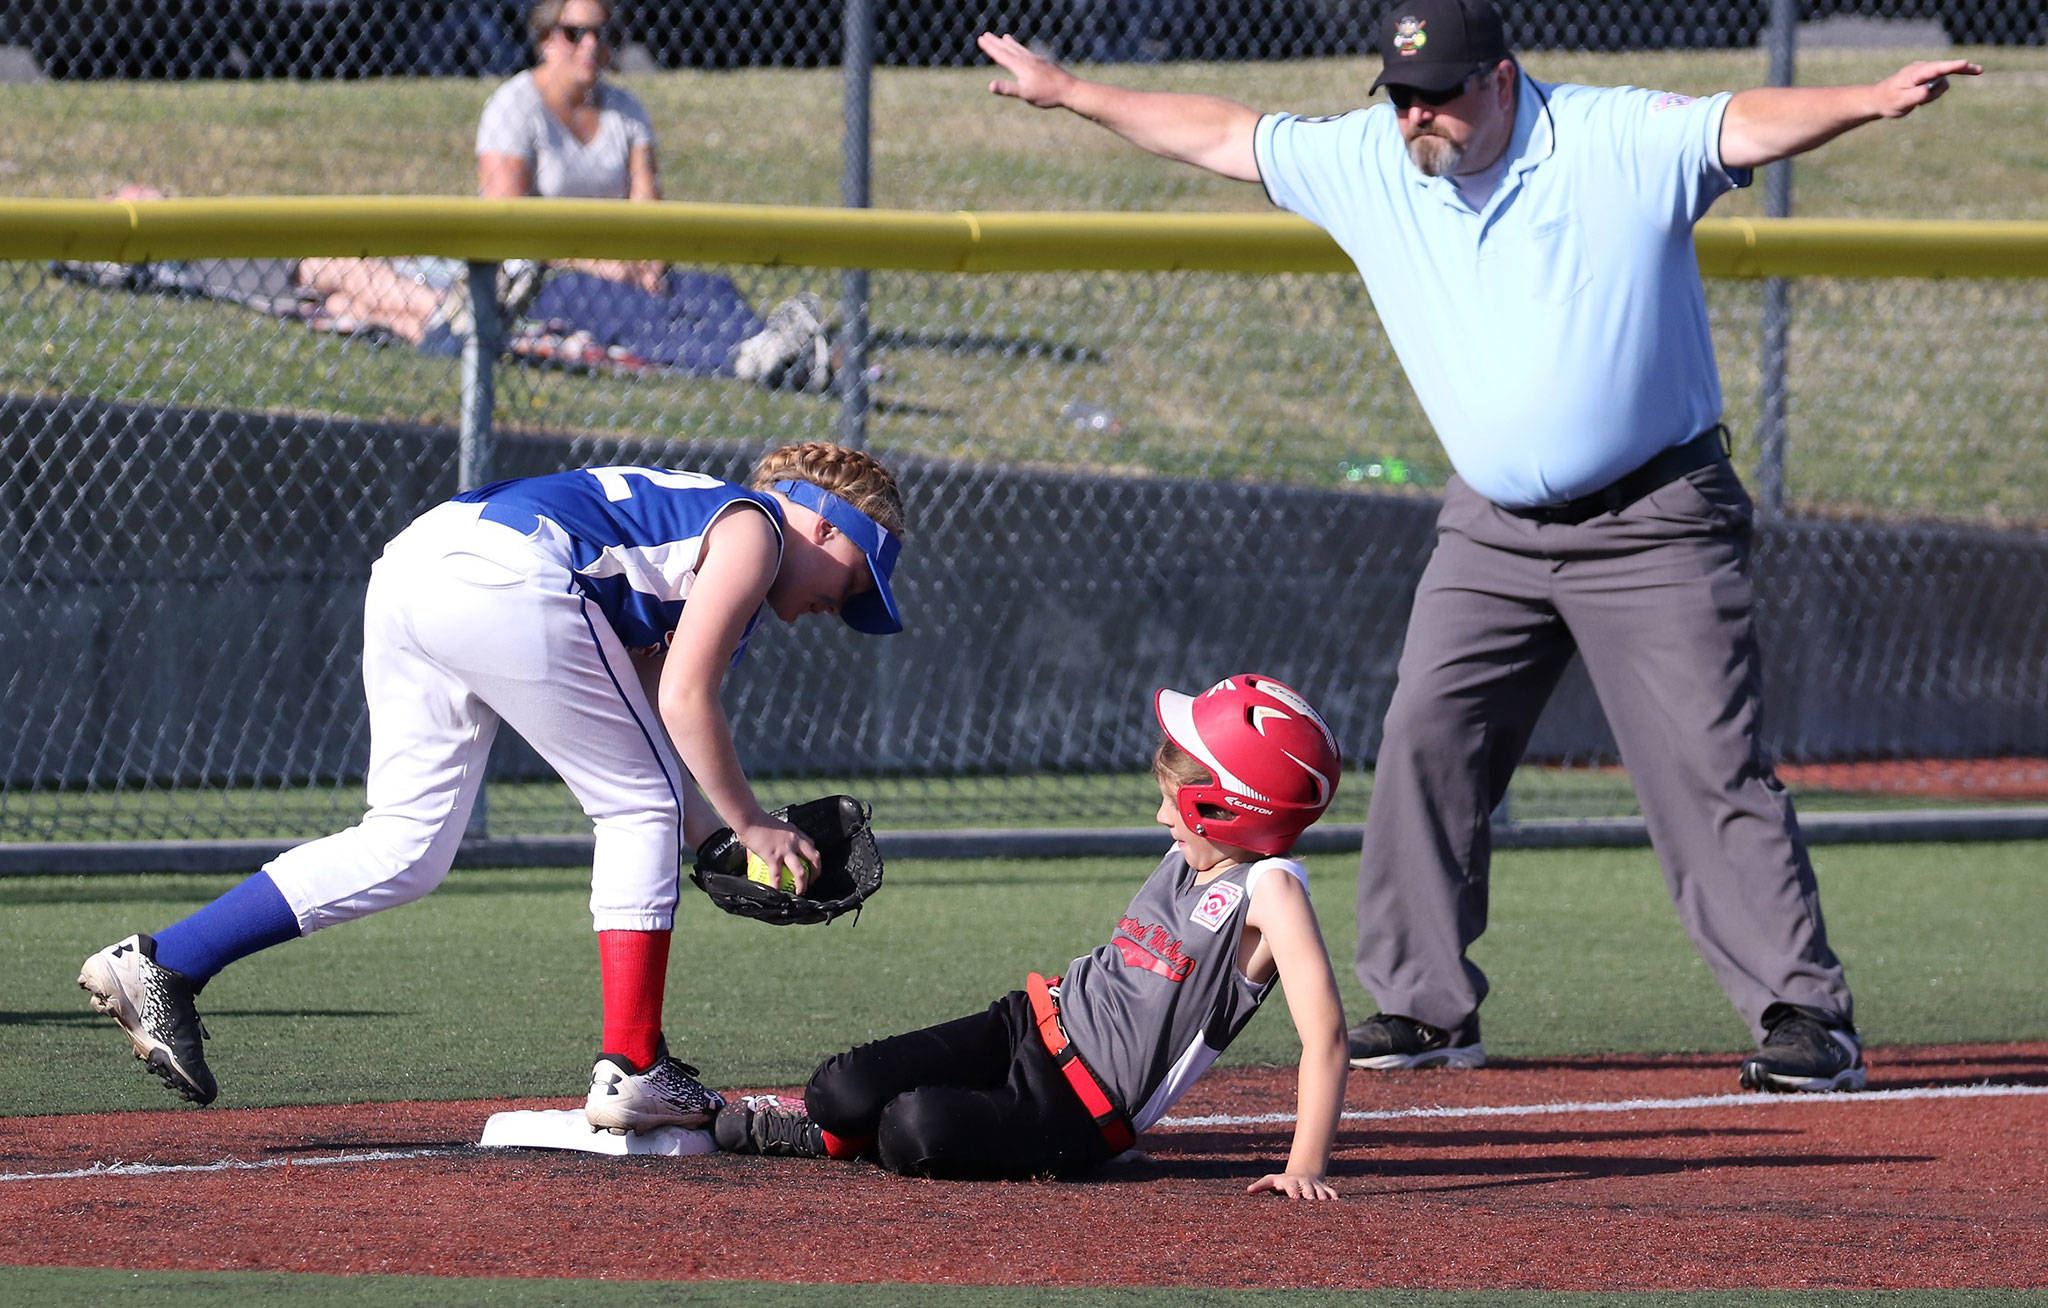 Central Whidbey’s Mia Farris slides in safely at third base in the district opening game Tuesday. (Photo by John Fisken)